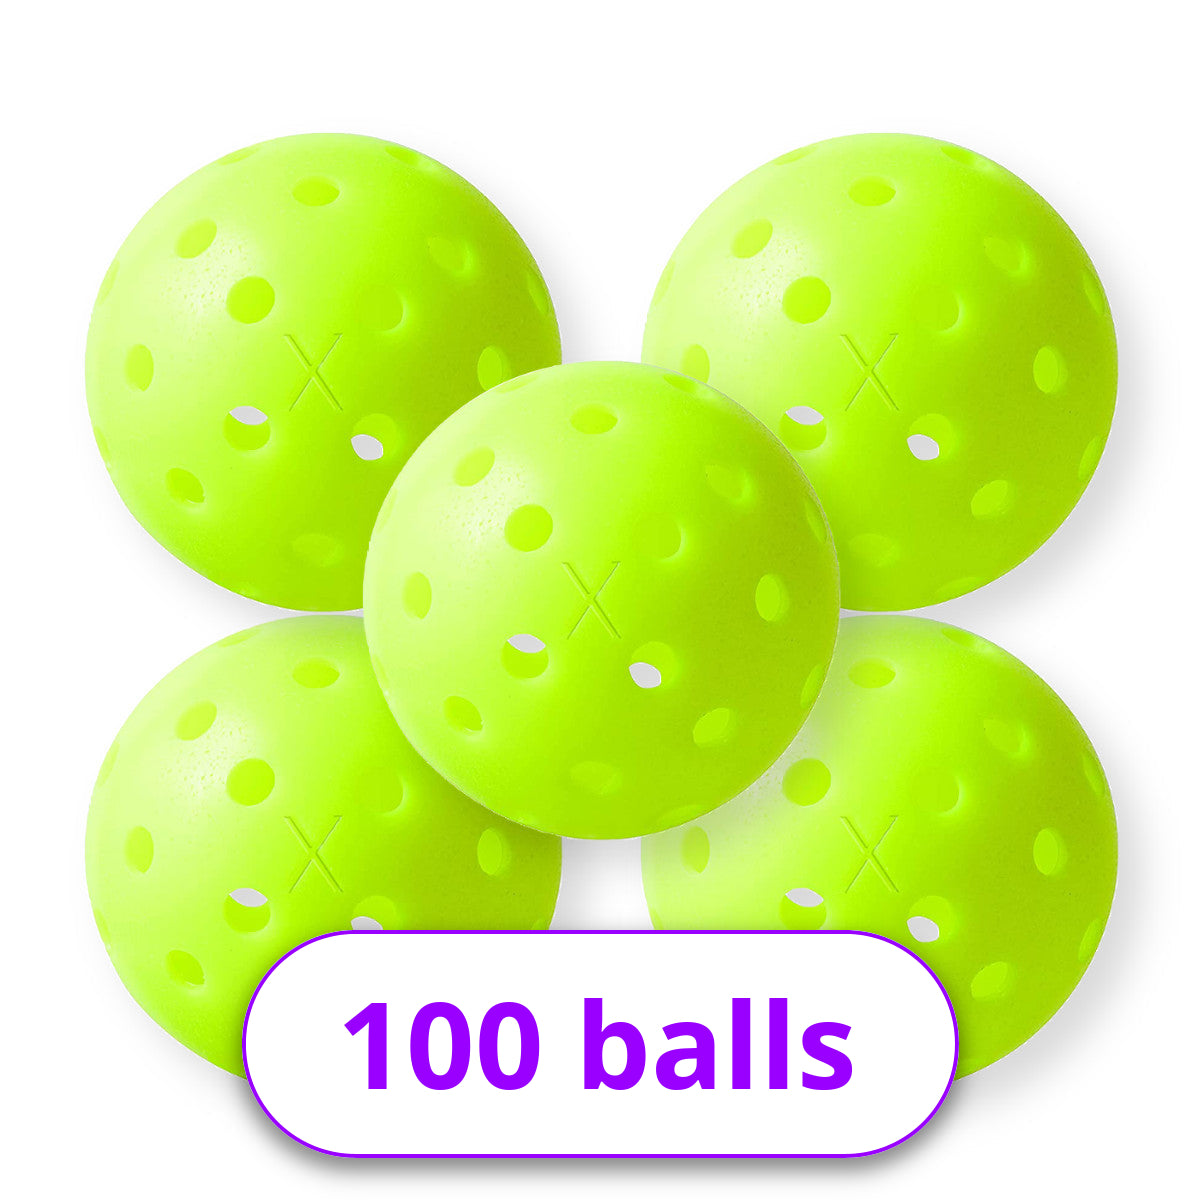 A set of Franklin X-40 Outdoor Pickleball Balls with the words 100 balls.